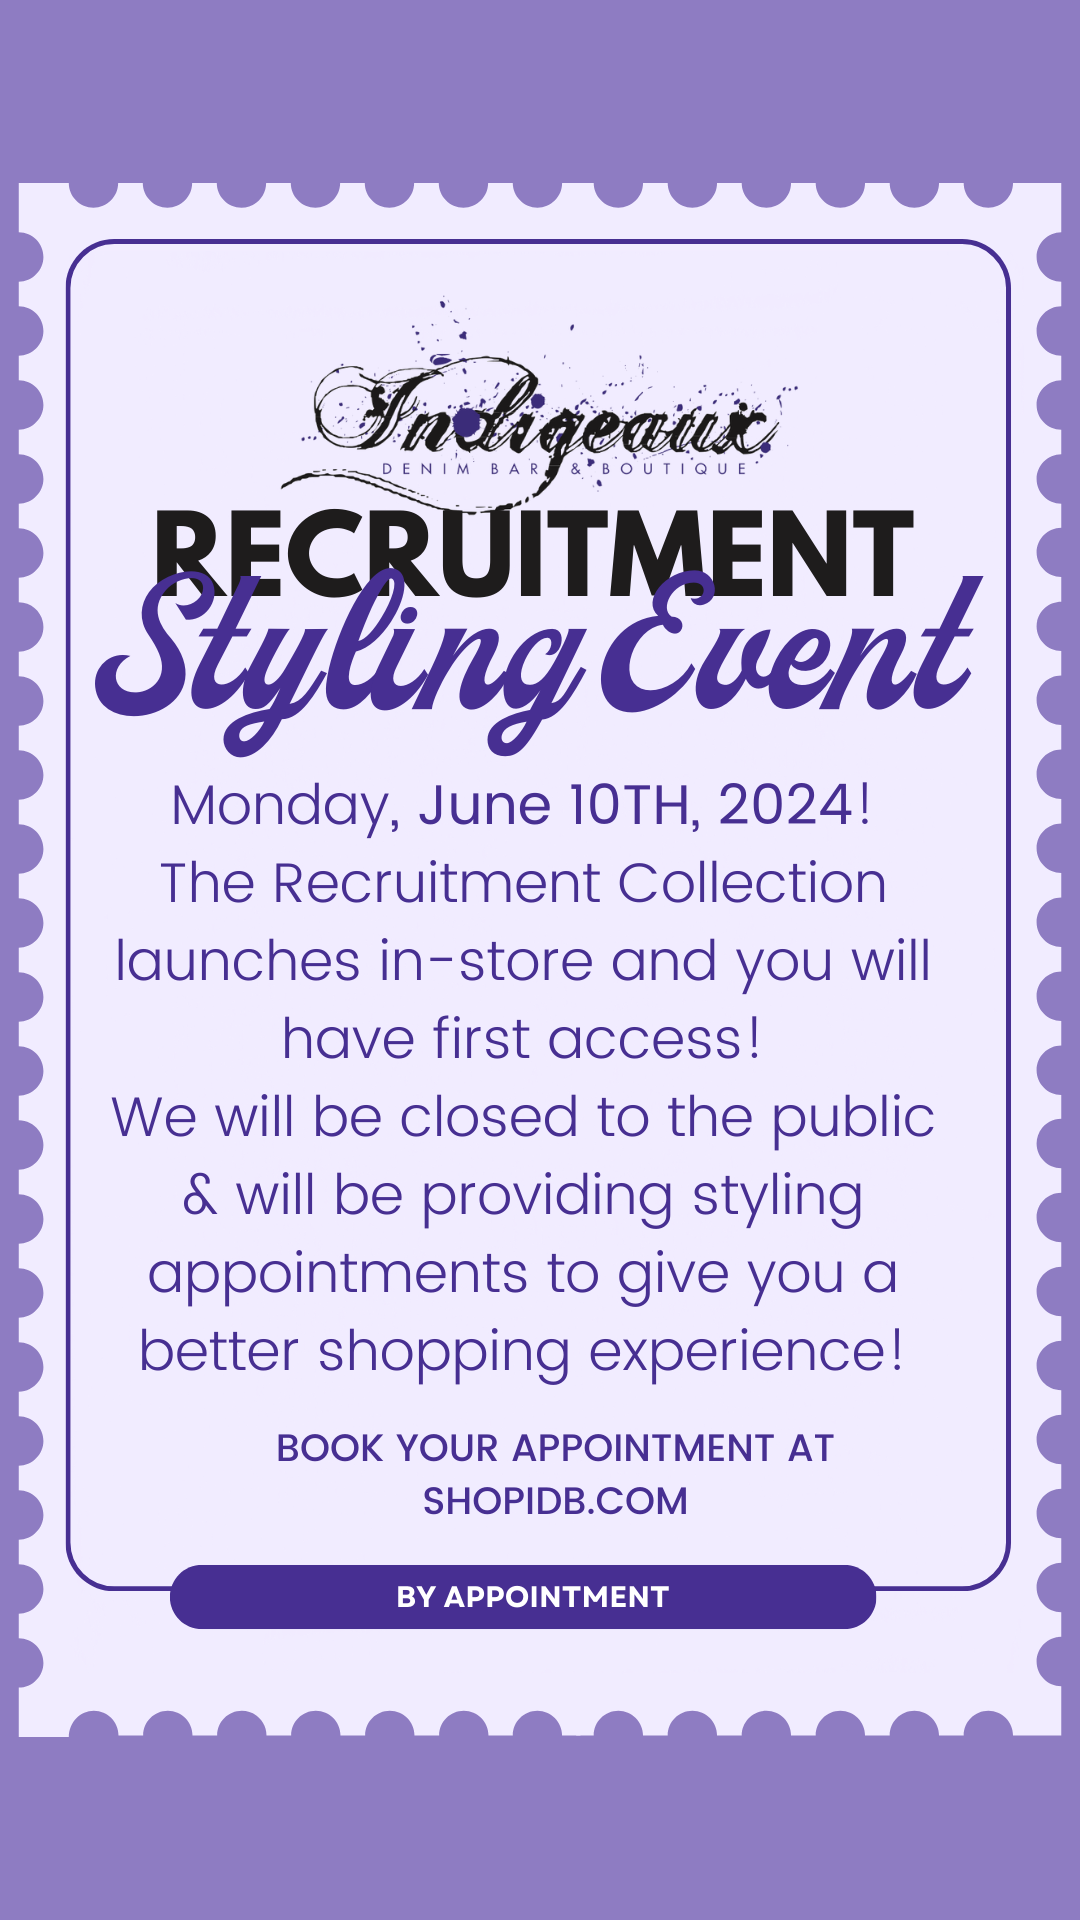 RECRUITMENT STYLING EVENT: MONDAY, JUNE 10TH, 2024